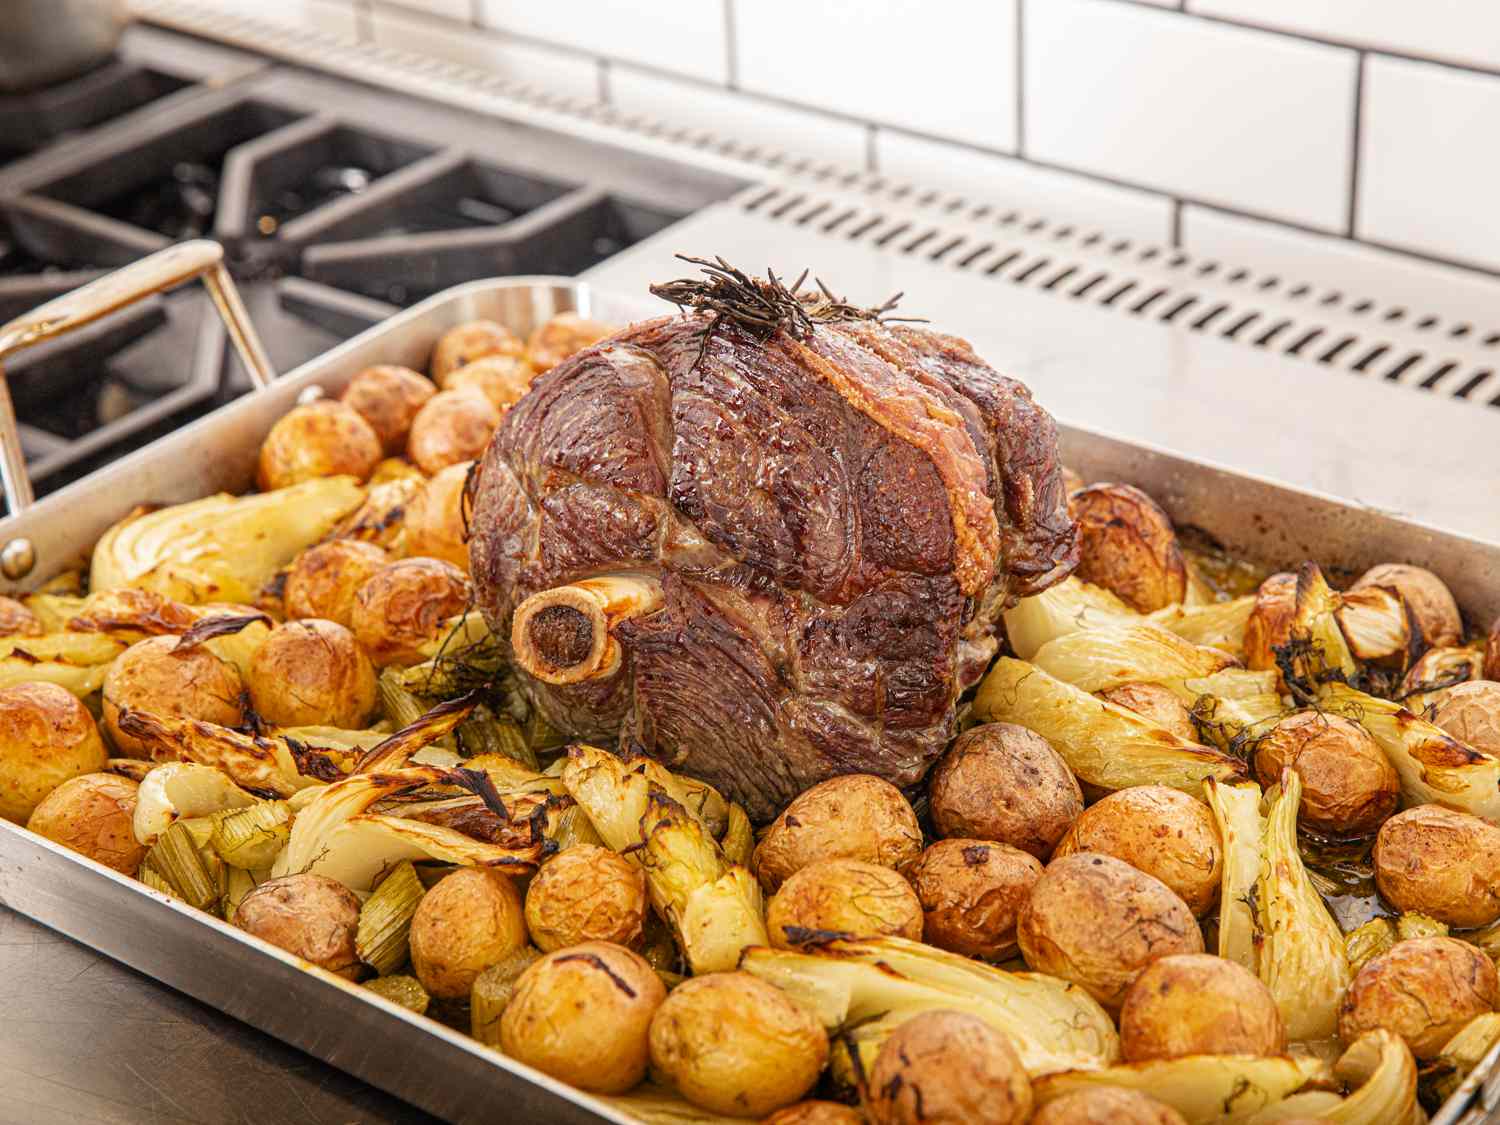 A cooked roast sitting atop browned potatoes and fennel in a roasting pan